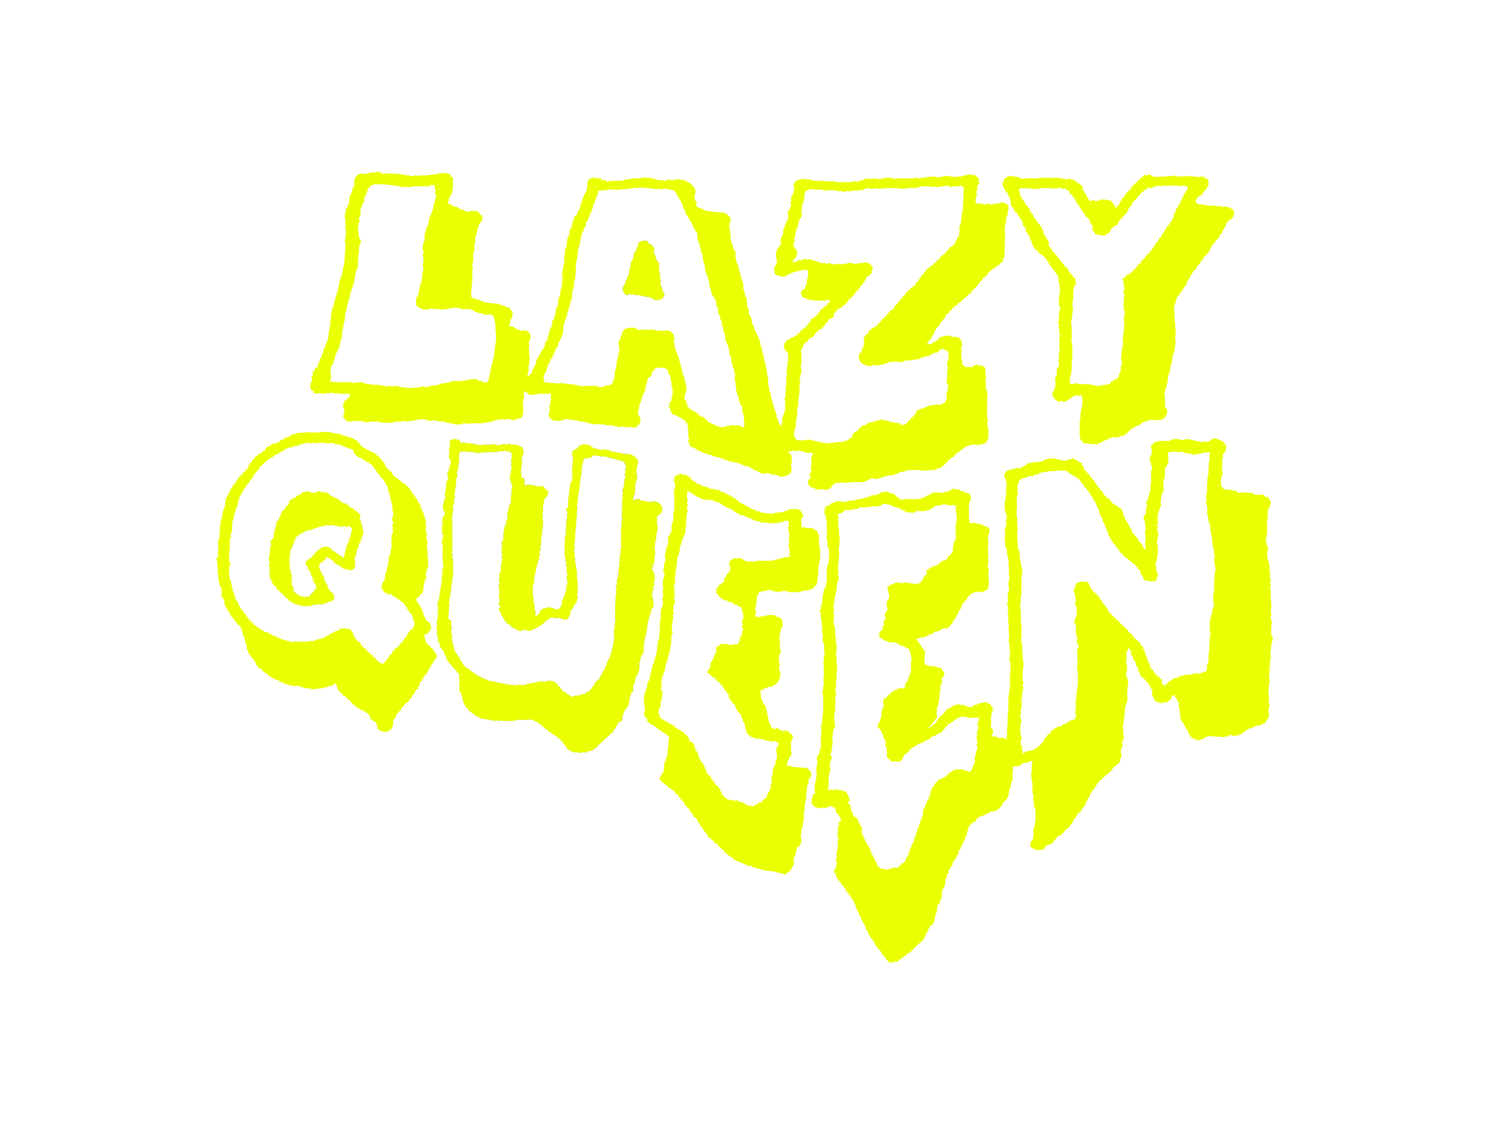 Lazy Queen